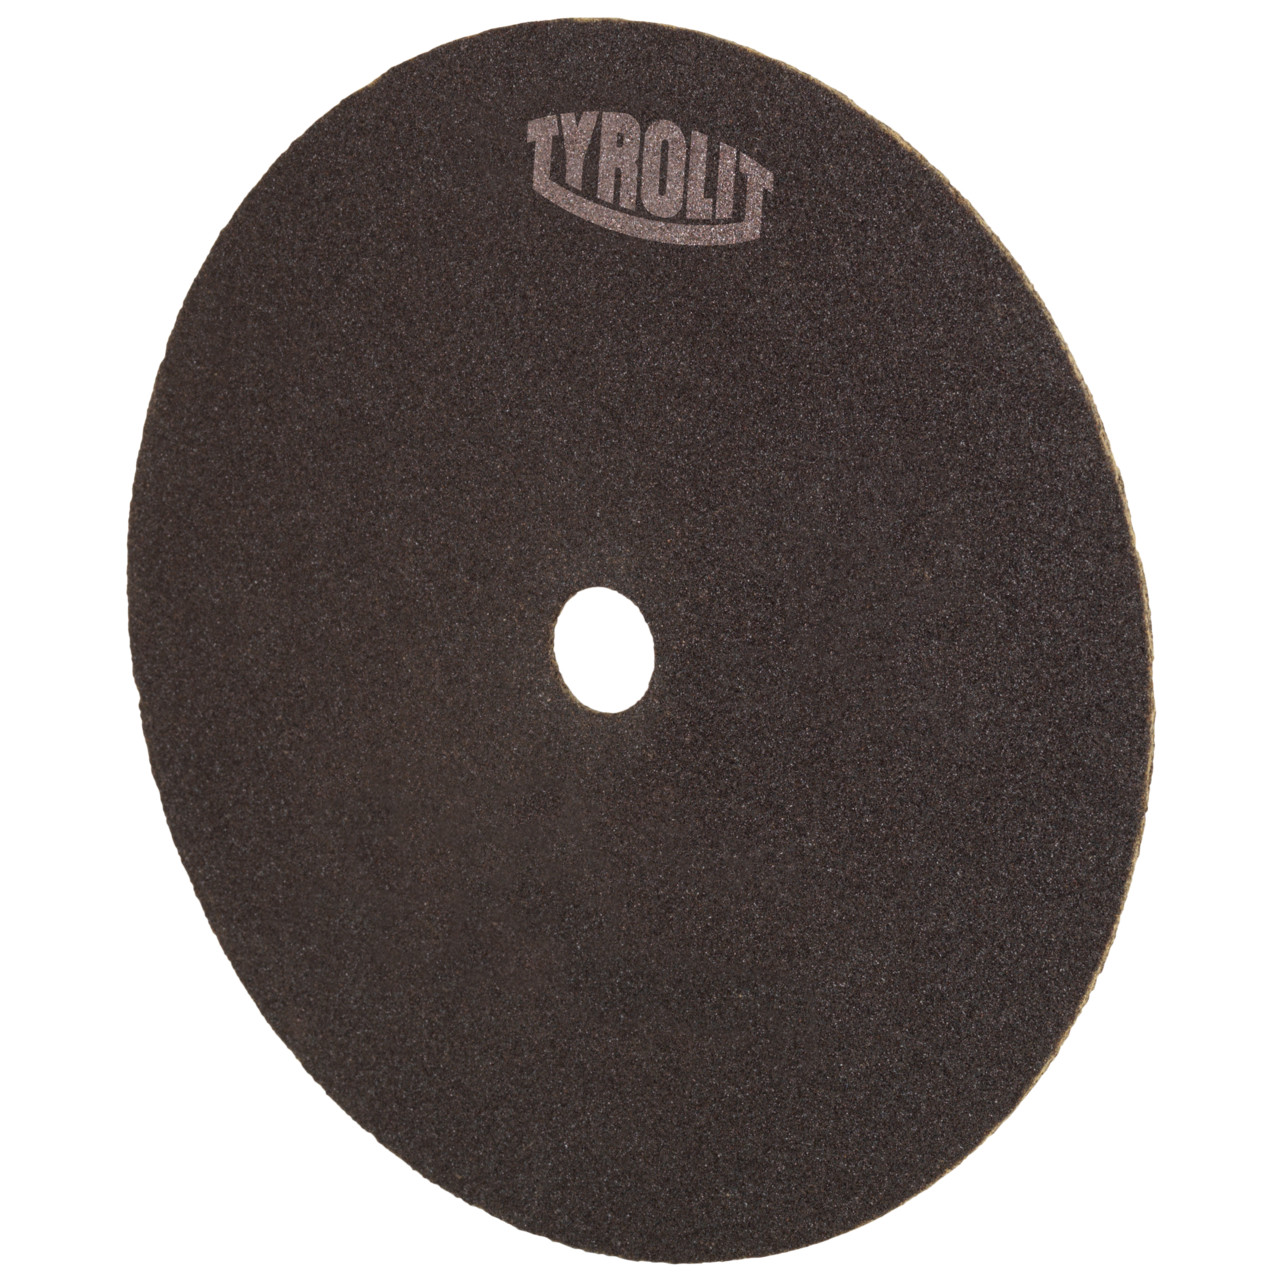 TYROLIT cut-off wheel for cutting and saw sharpening DxDxH 200x2x20 For steel and HSS, shape: 41N - straight version (non-woven cut-off wheel), Art. 6710